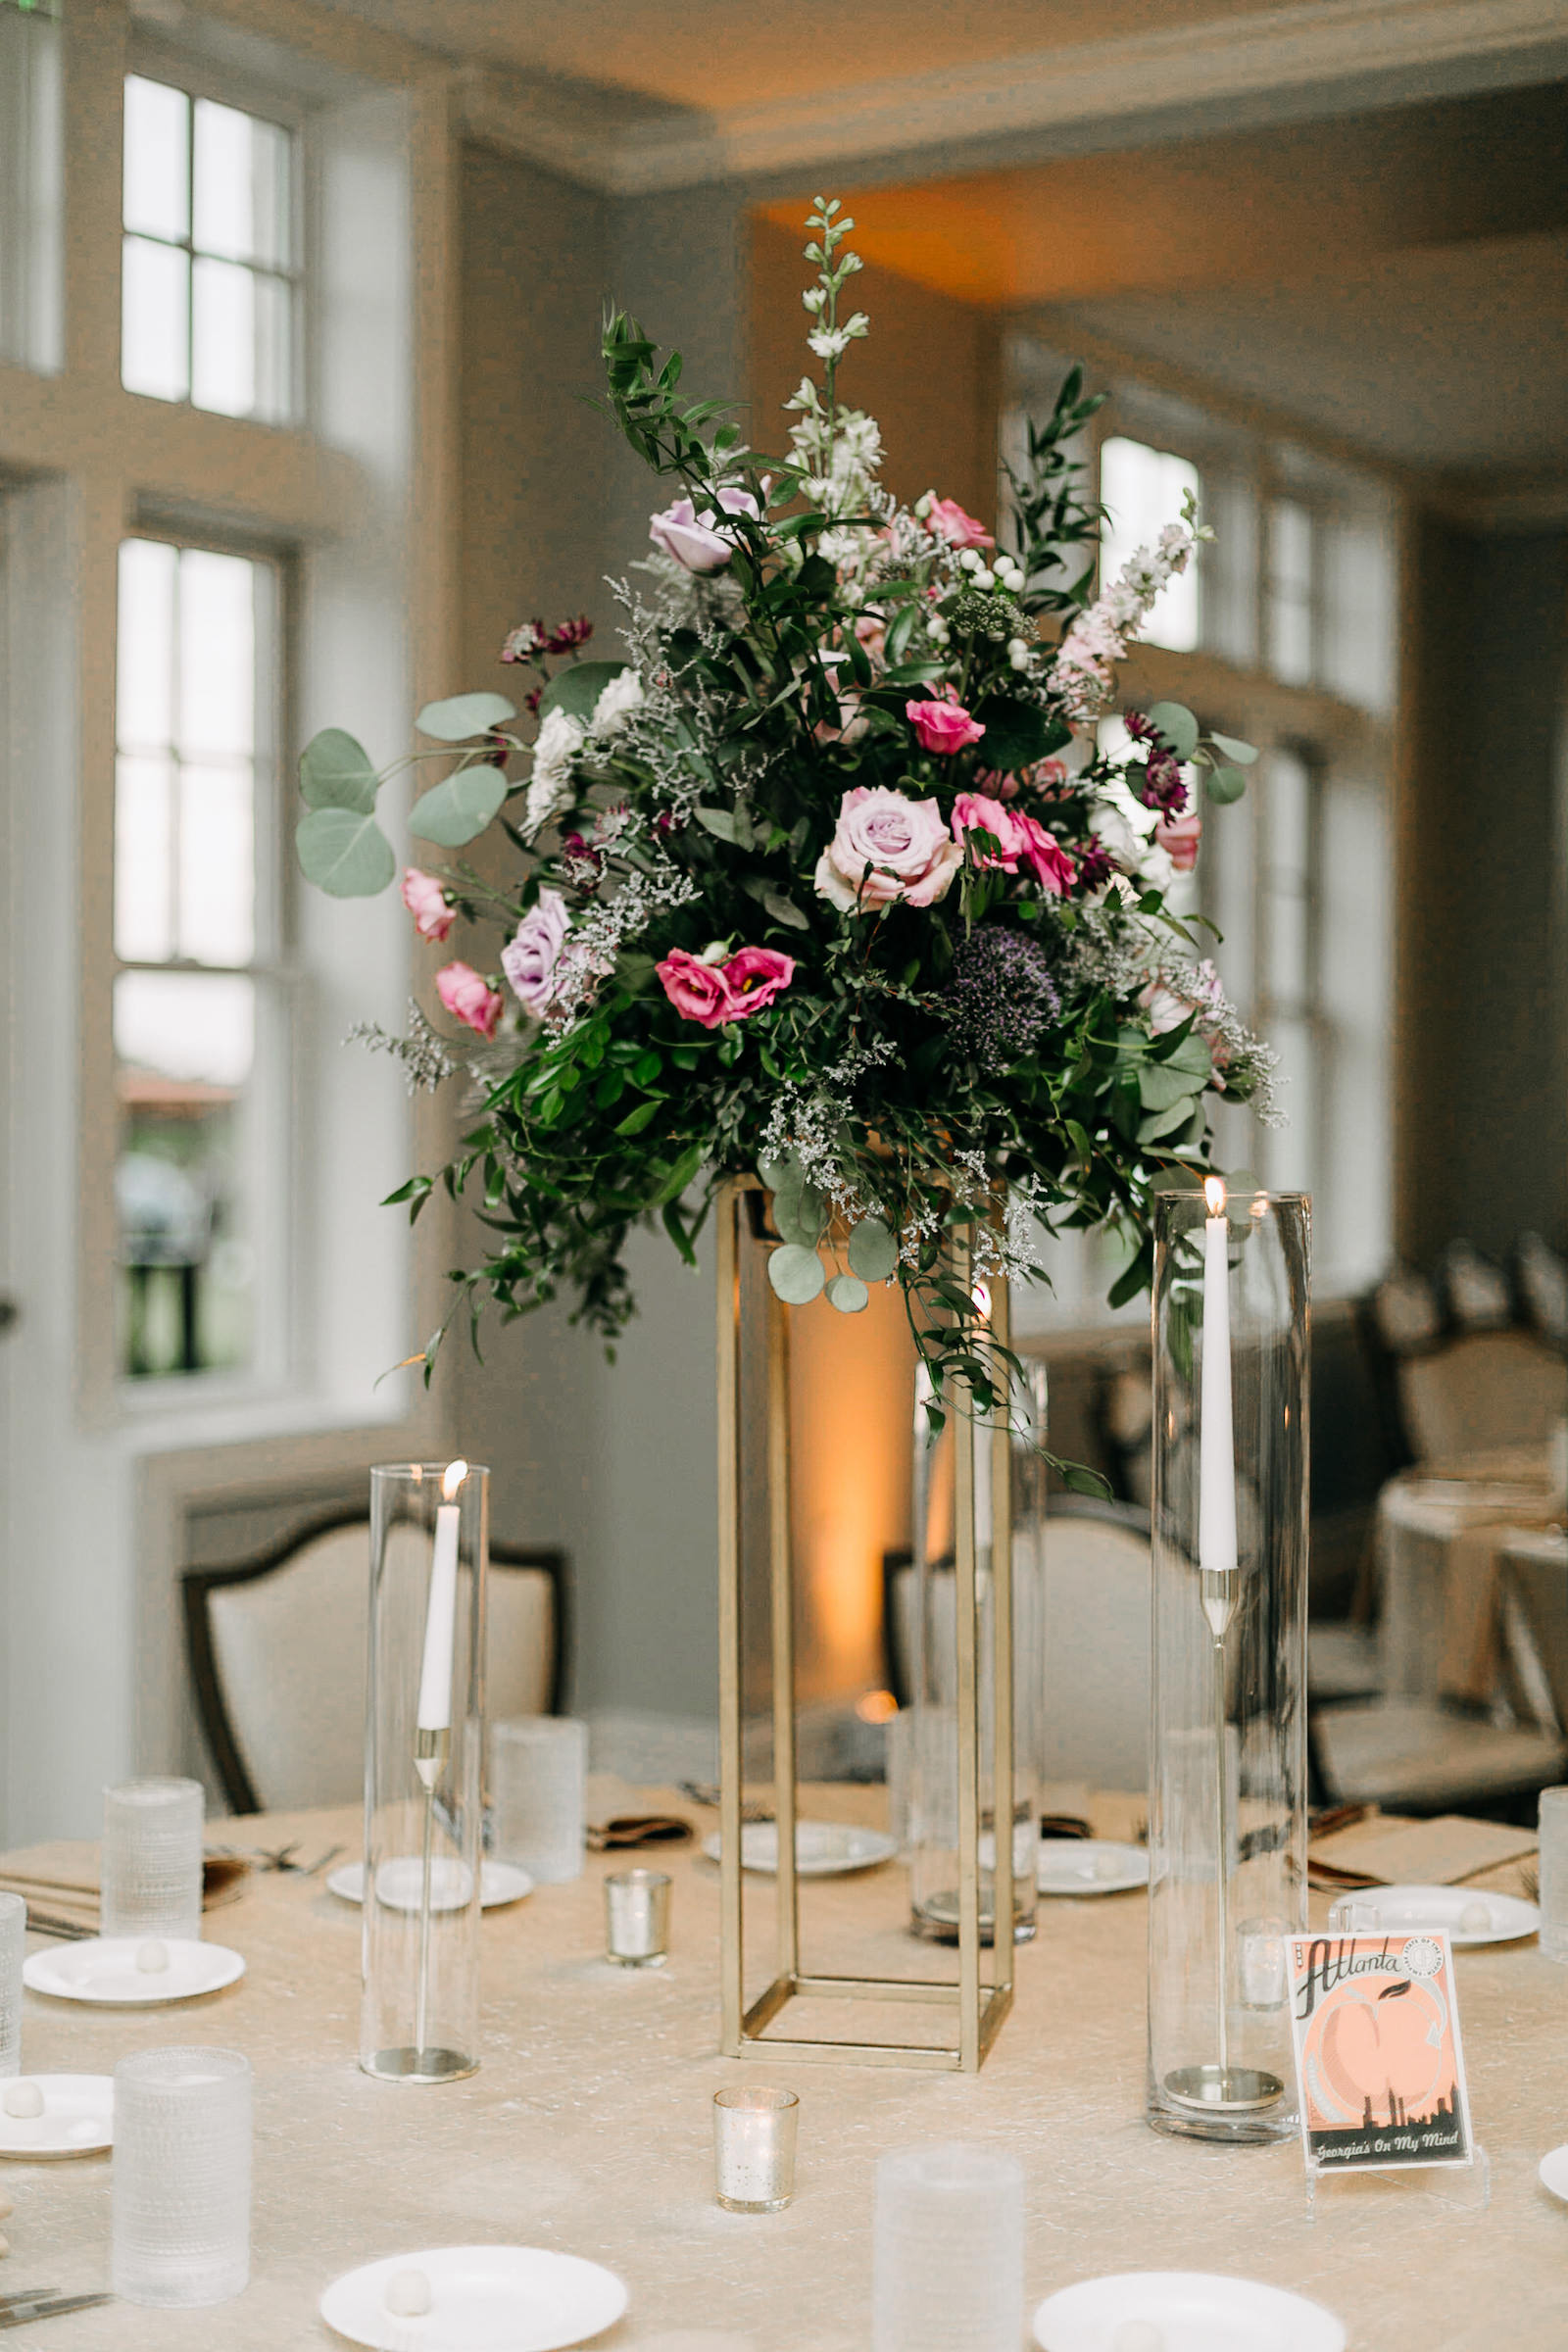 Wedding Reception Decor, Lush Wedding Floral Centerpiece, Greenery with Pink and Purple Roses | Tampa Bay Wedding Photographer Amber McWhorter Photography | Wedding Florist Leaf It To Us